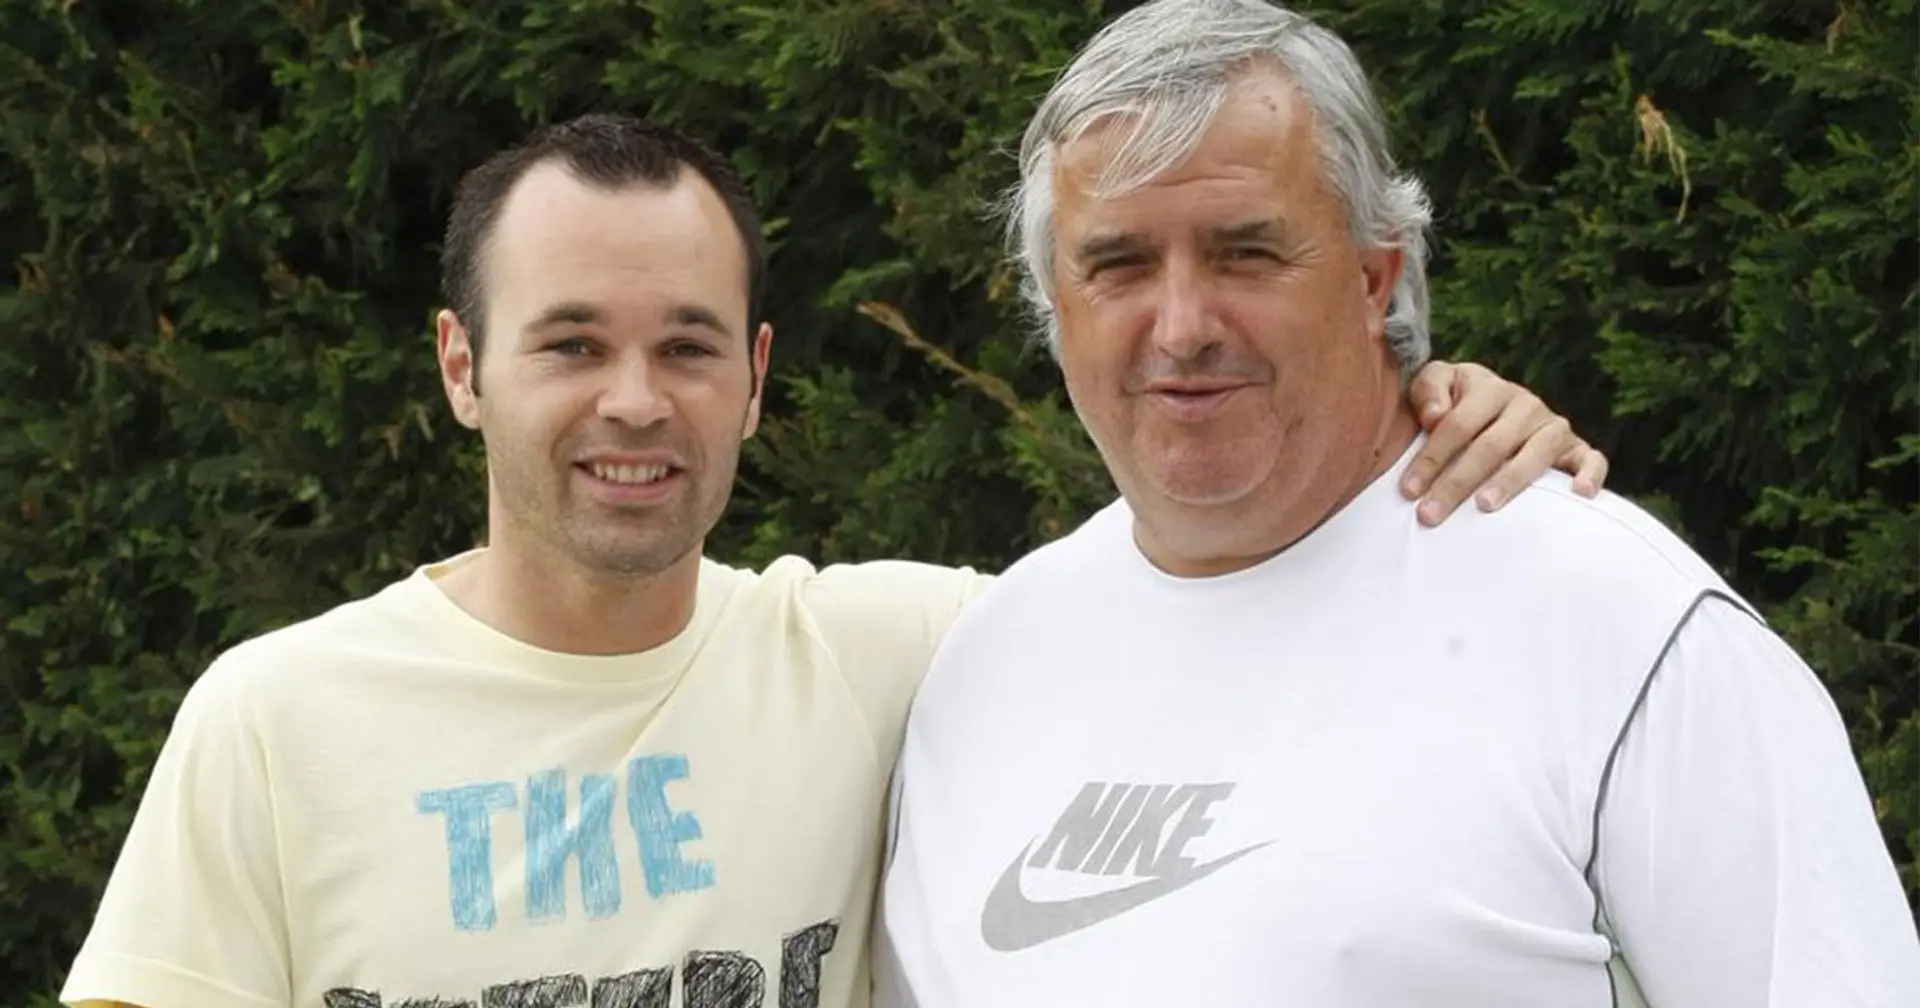 Coach who discovered Xavi and Iniesta will join Laporta's team if Joan wins election